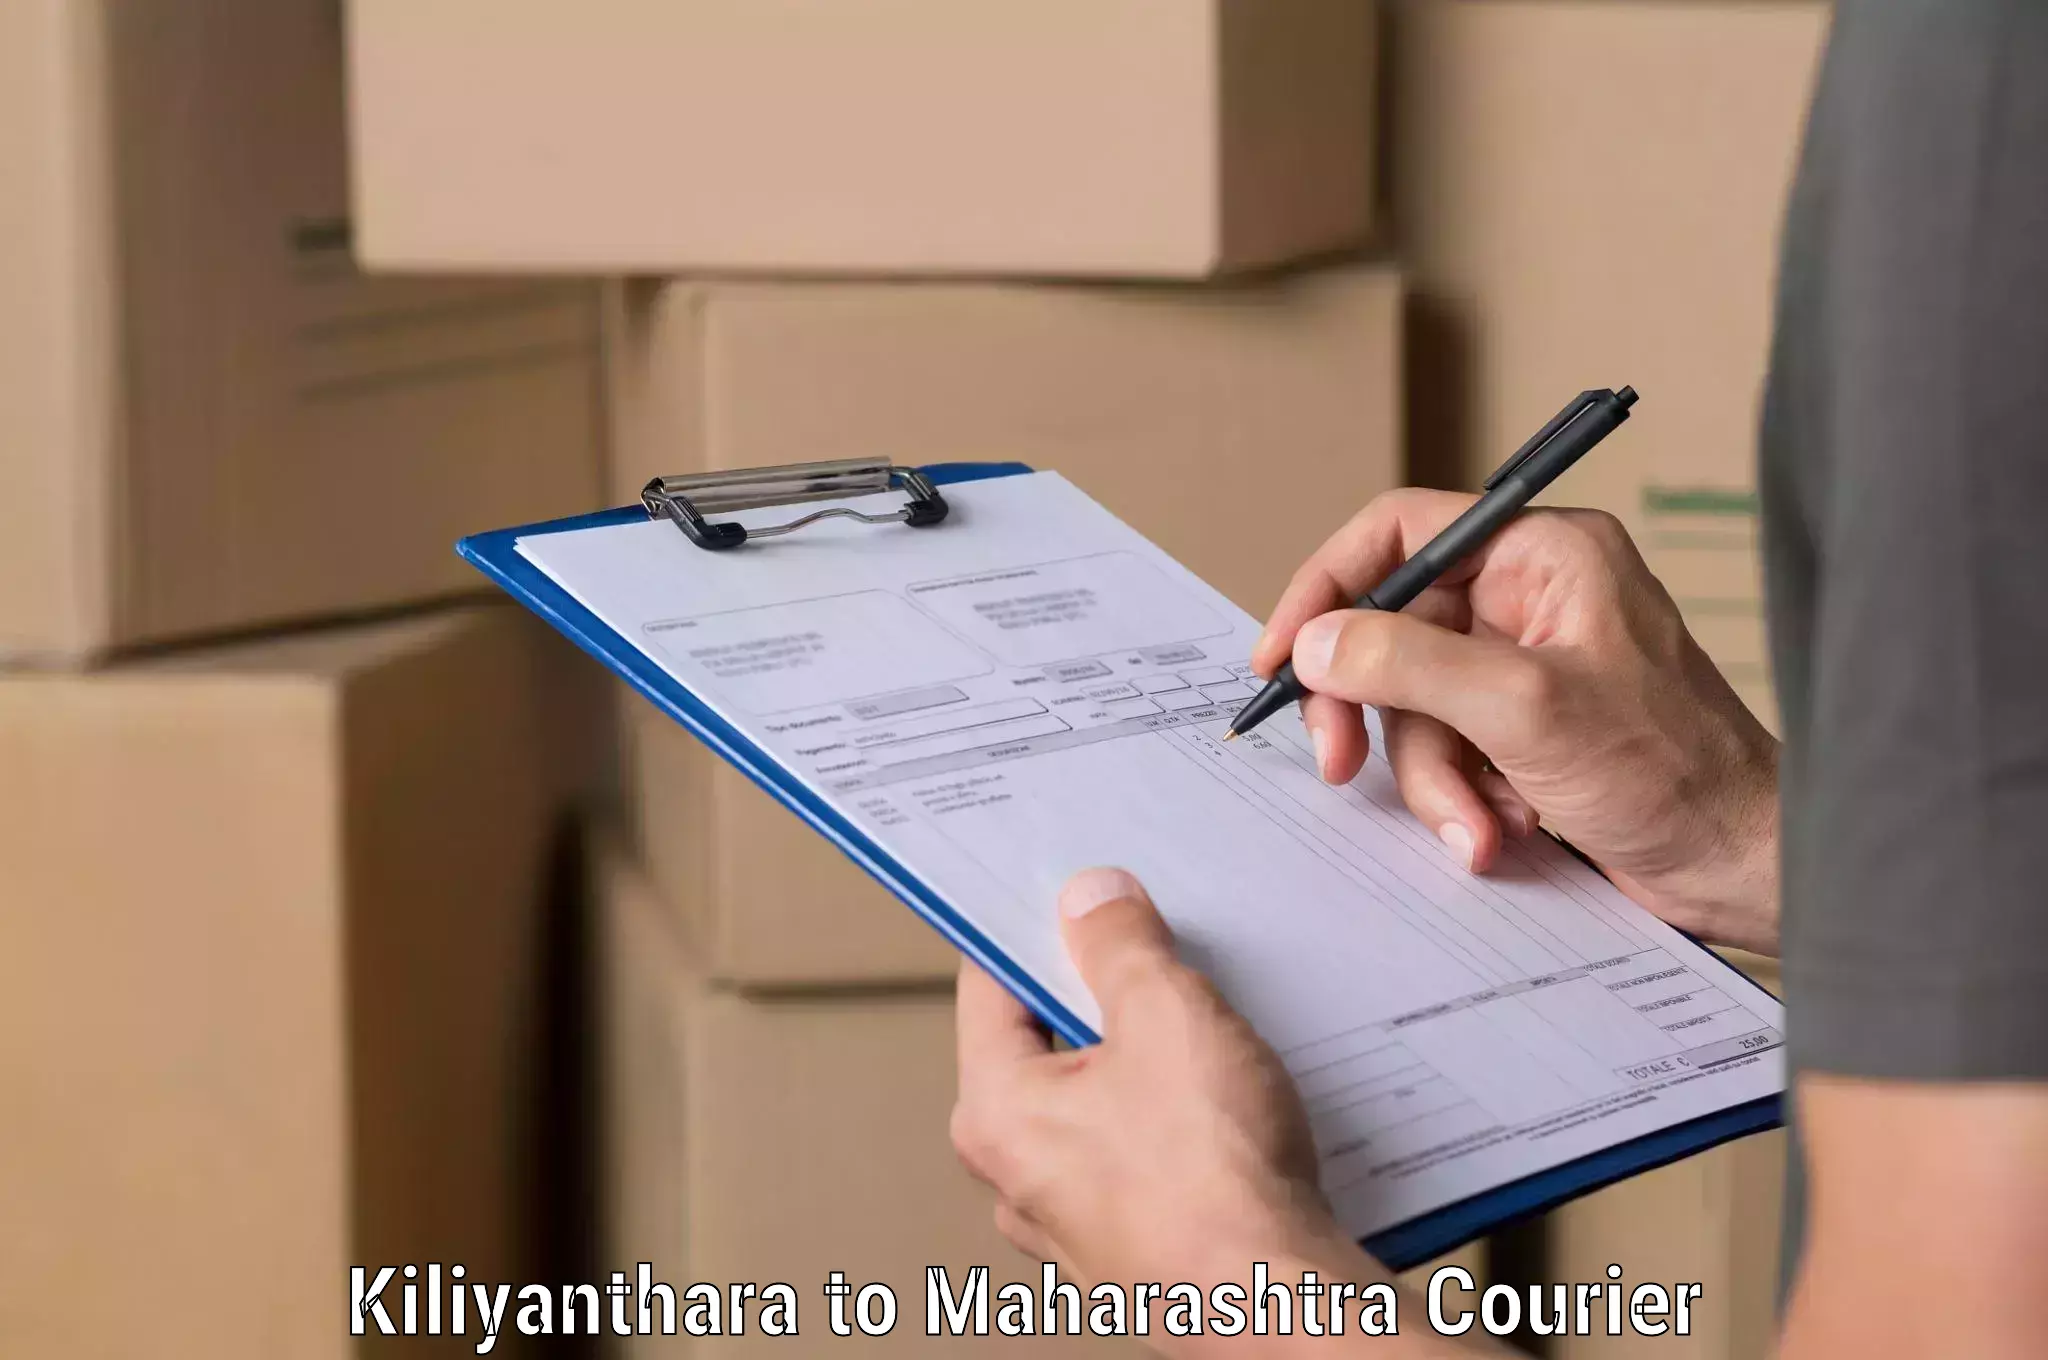 Parcel service for businesses in Kiliyanthara to Mumbai Port